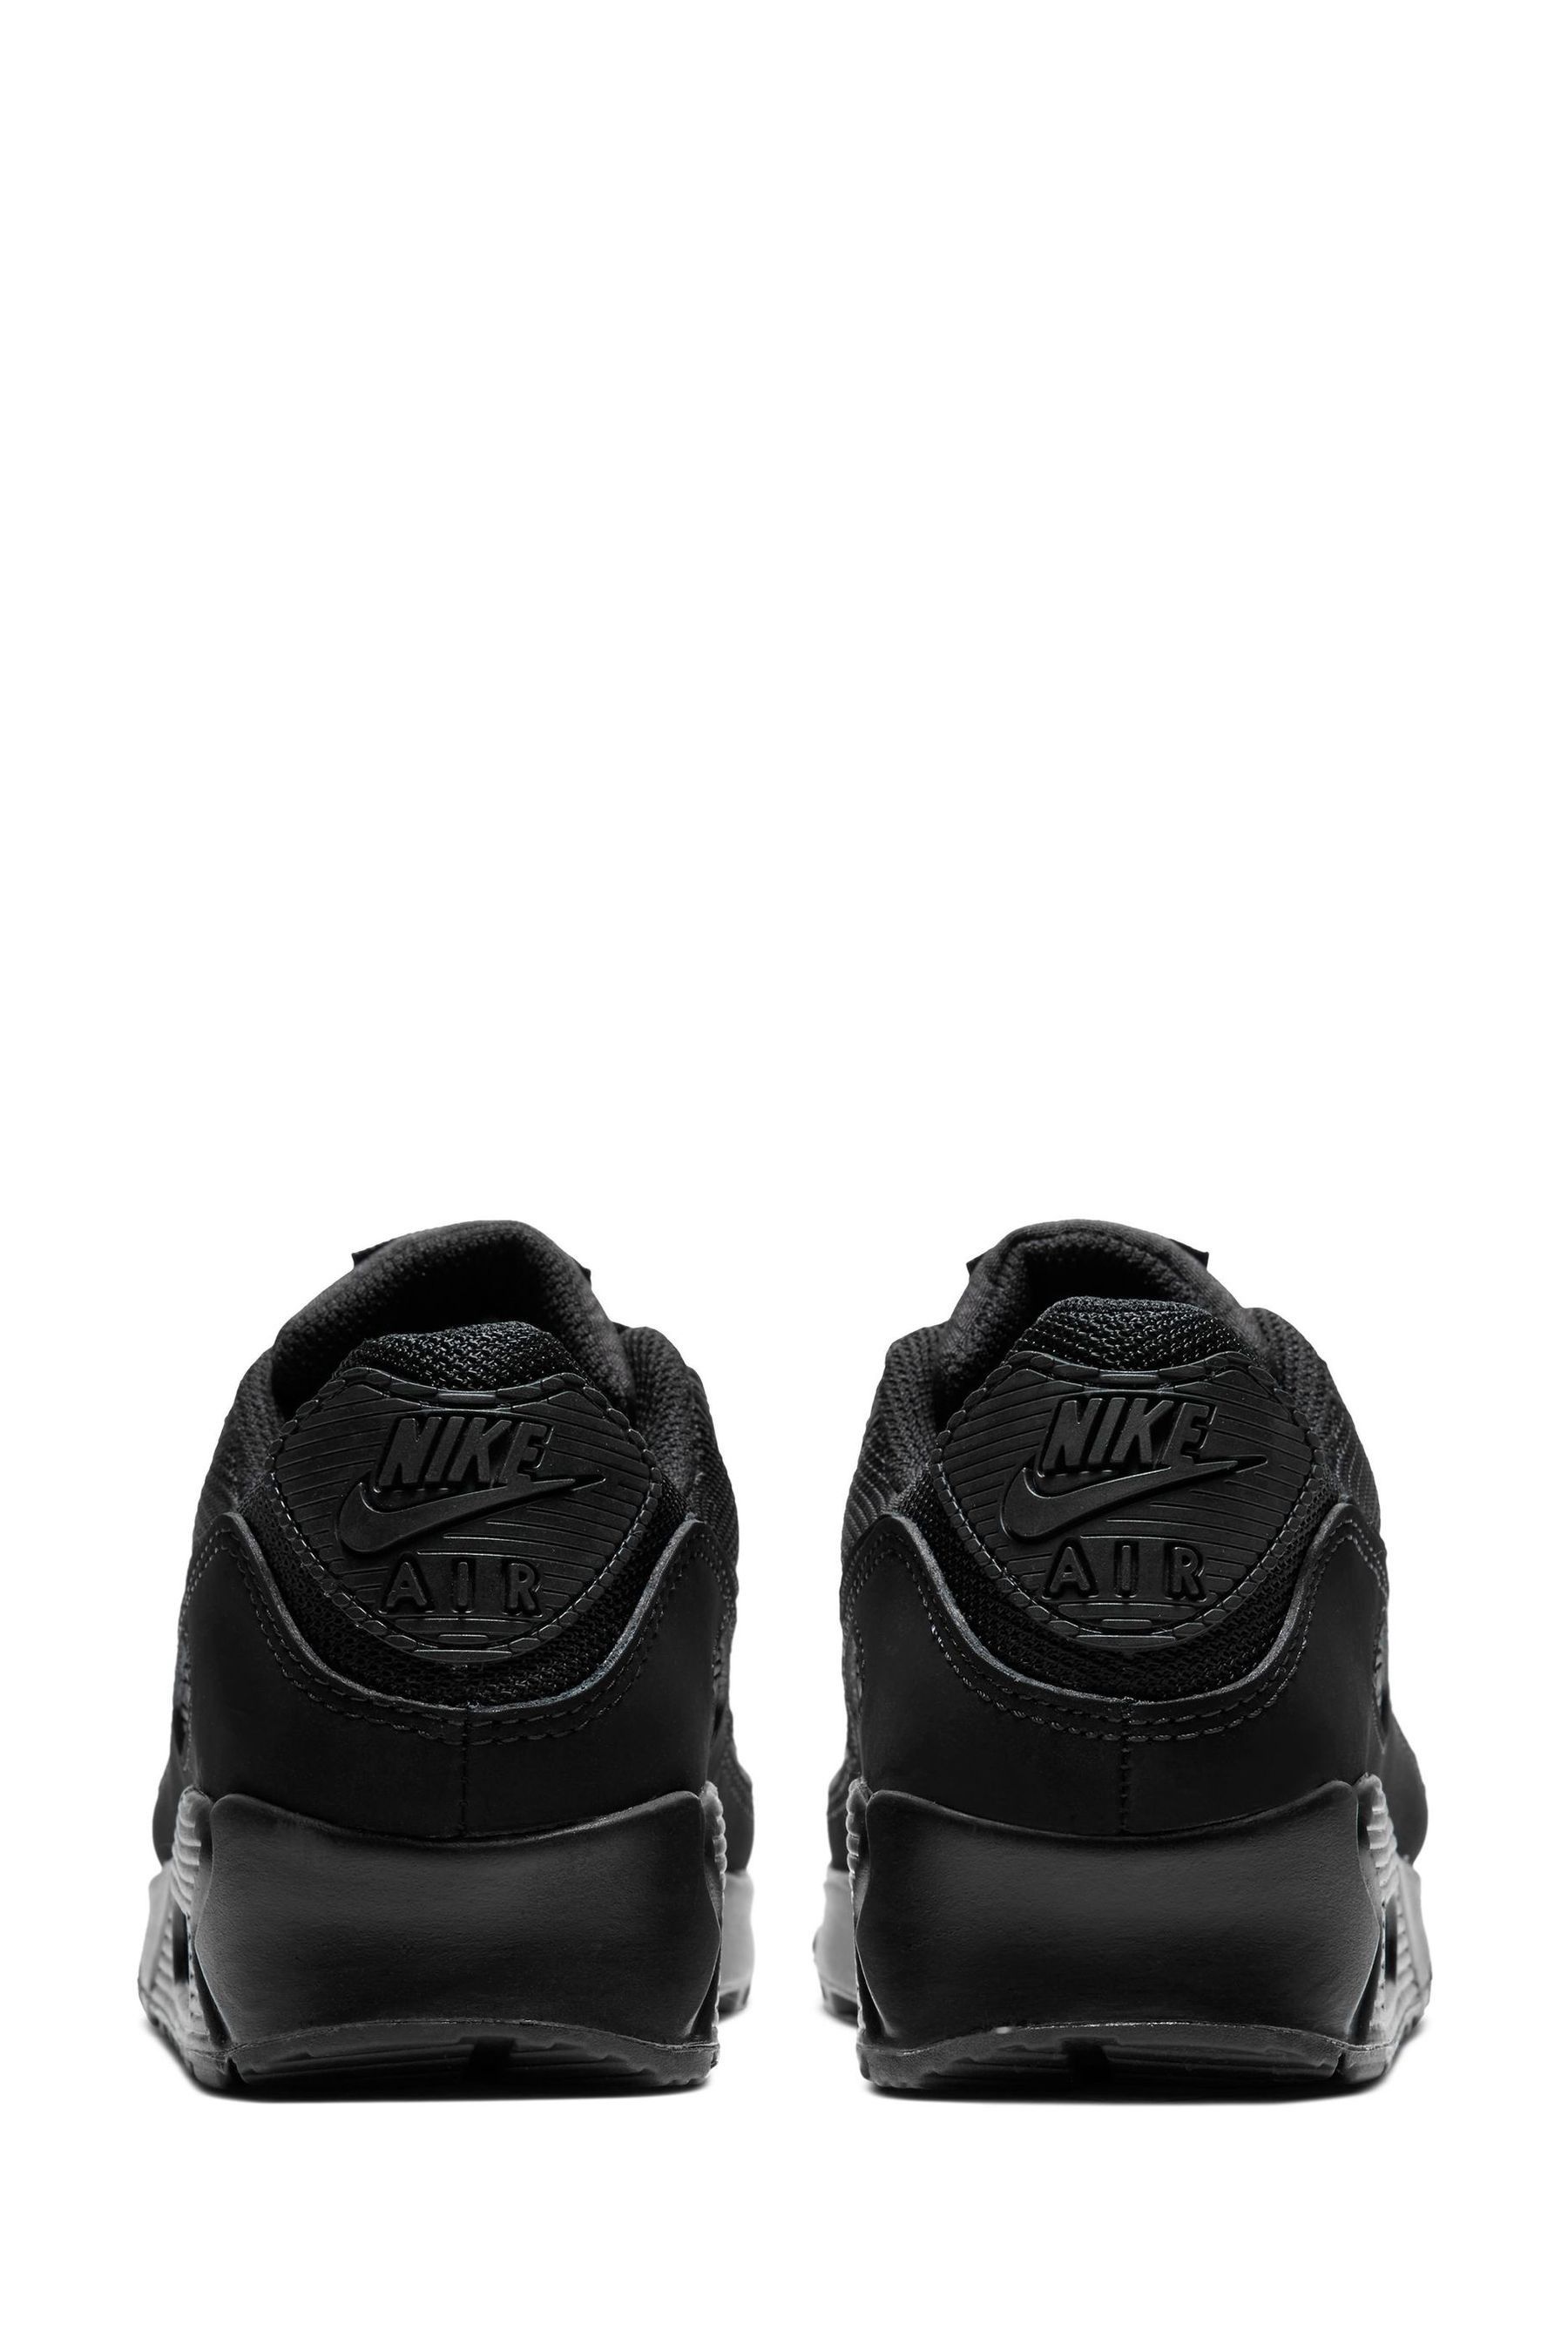 Buy Nike Black Air Max SC Trainers from the Next UK online shop